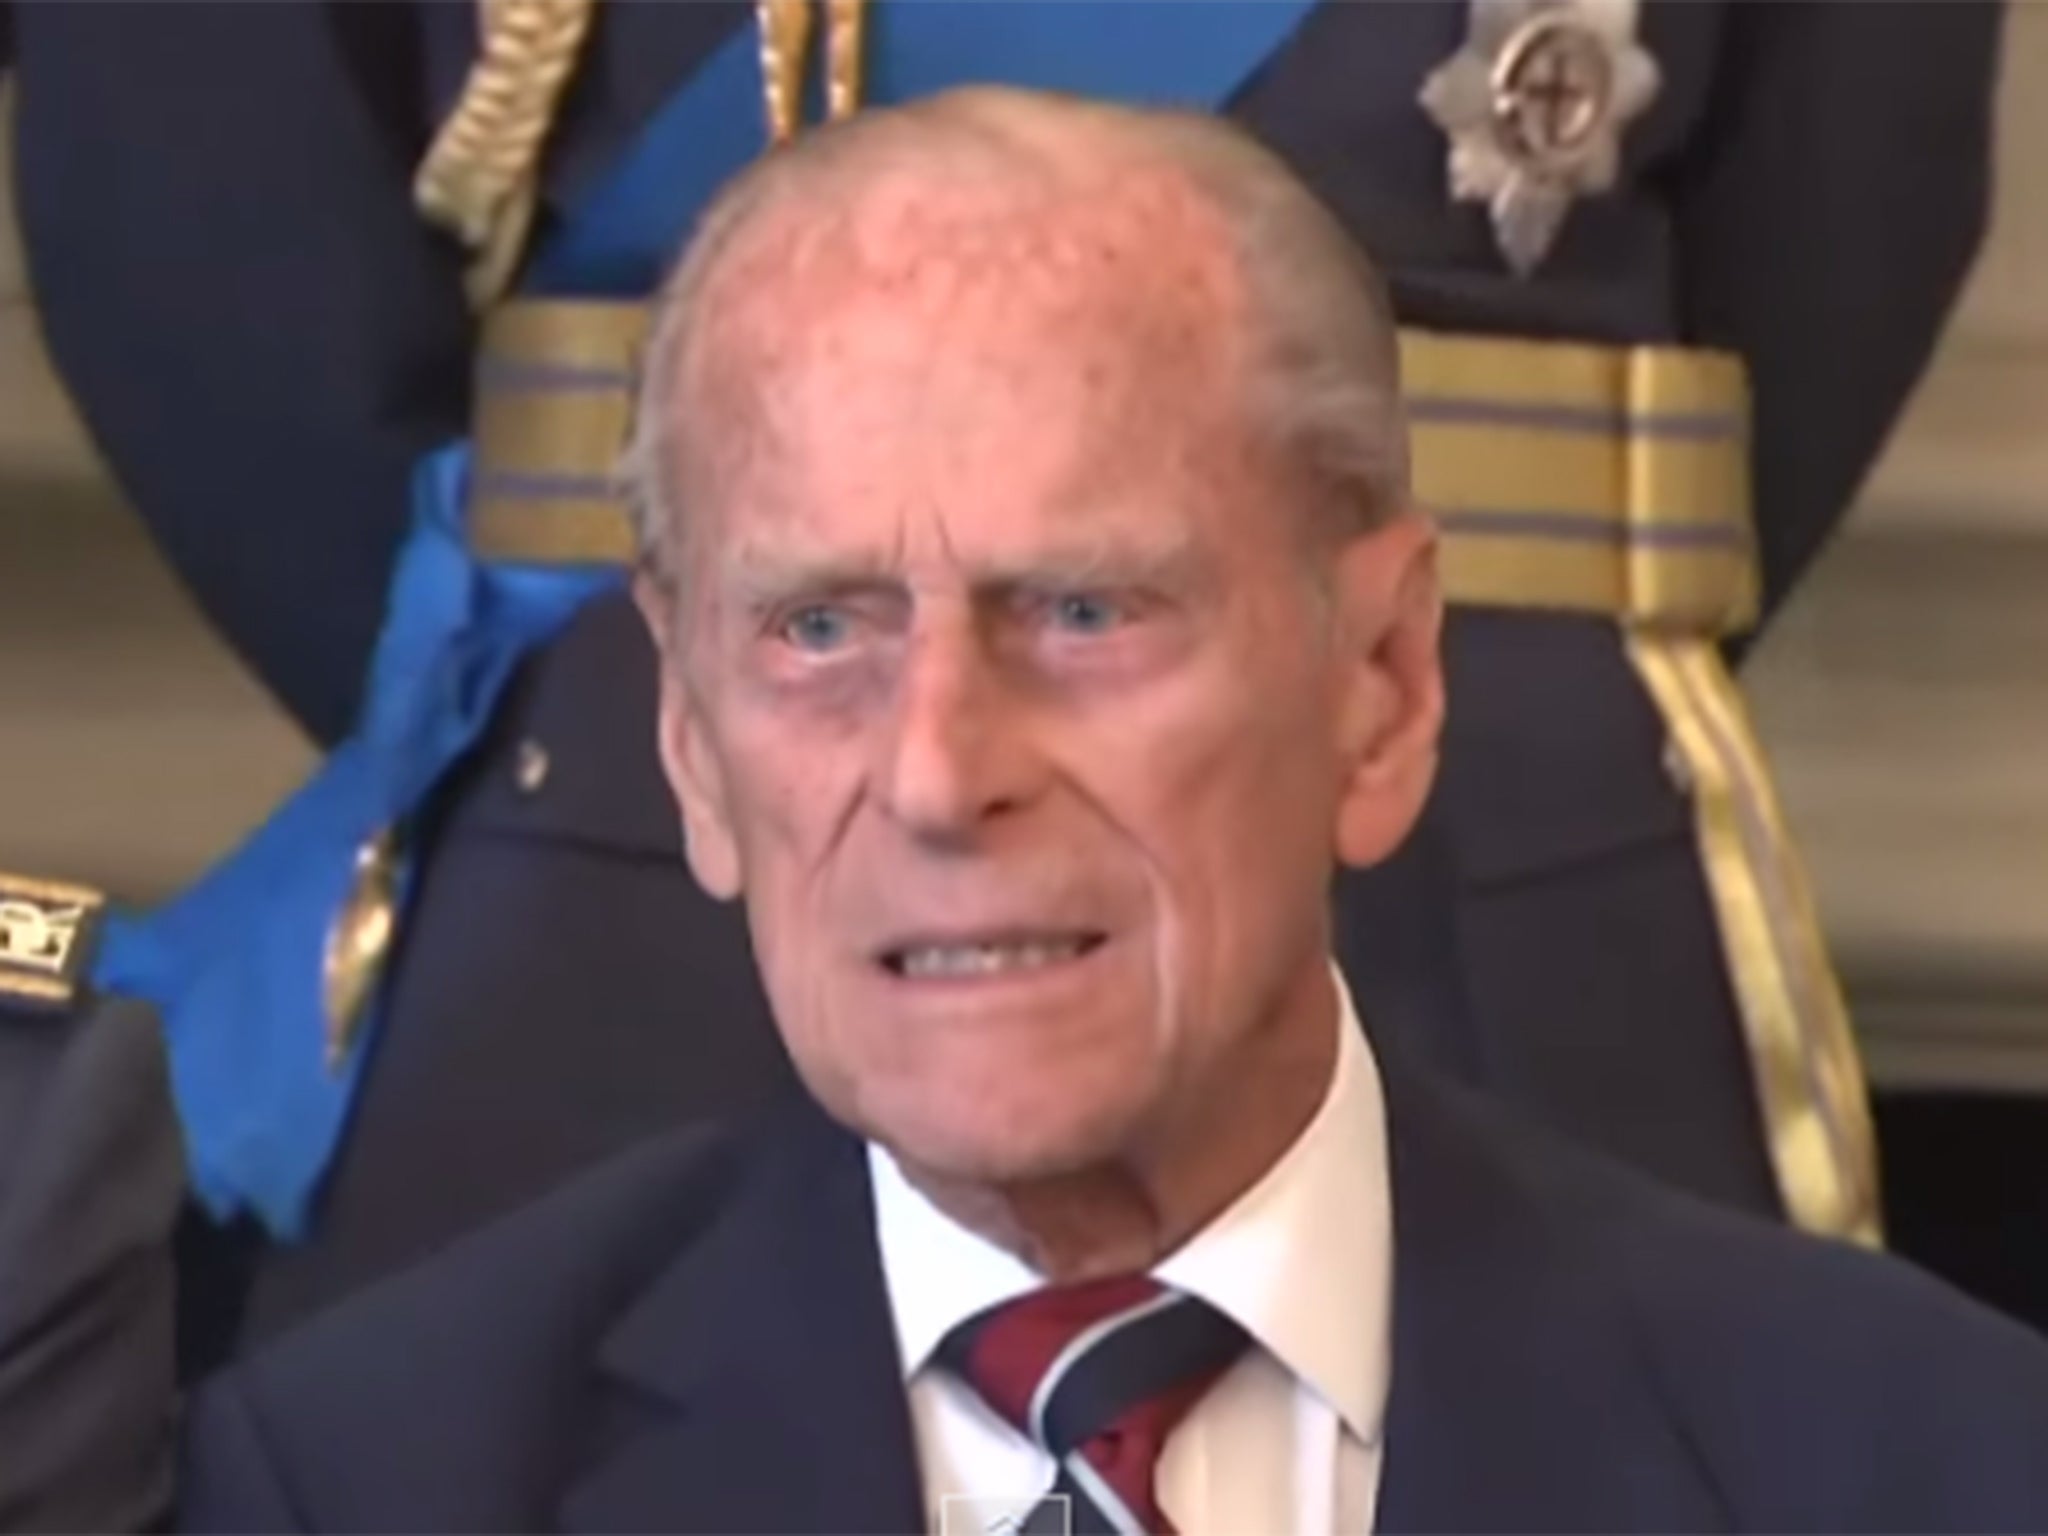 Prince Philip impatiently swears at photographer: 'Just take the f